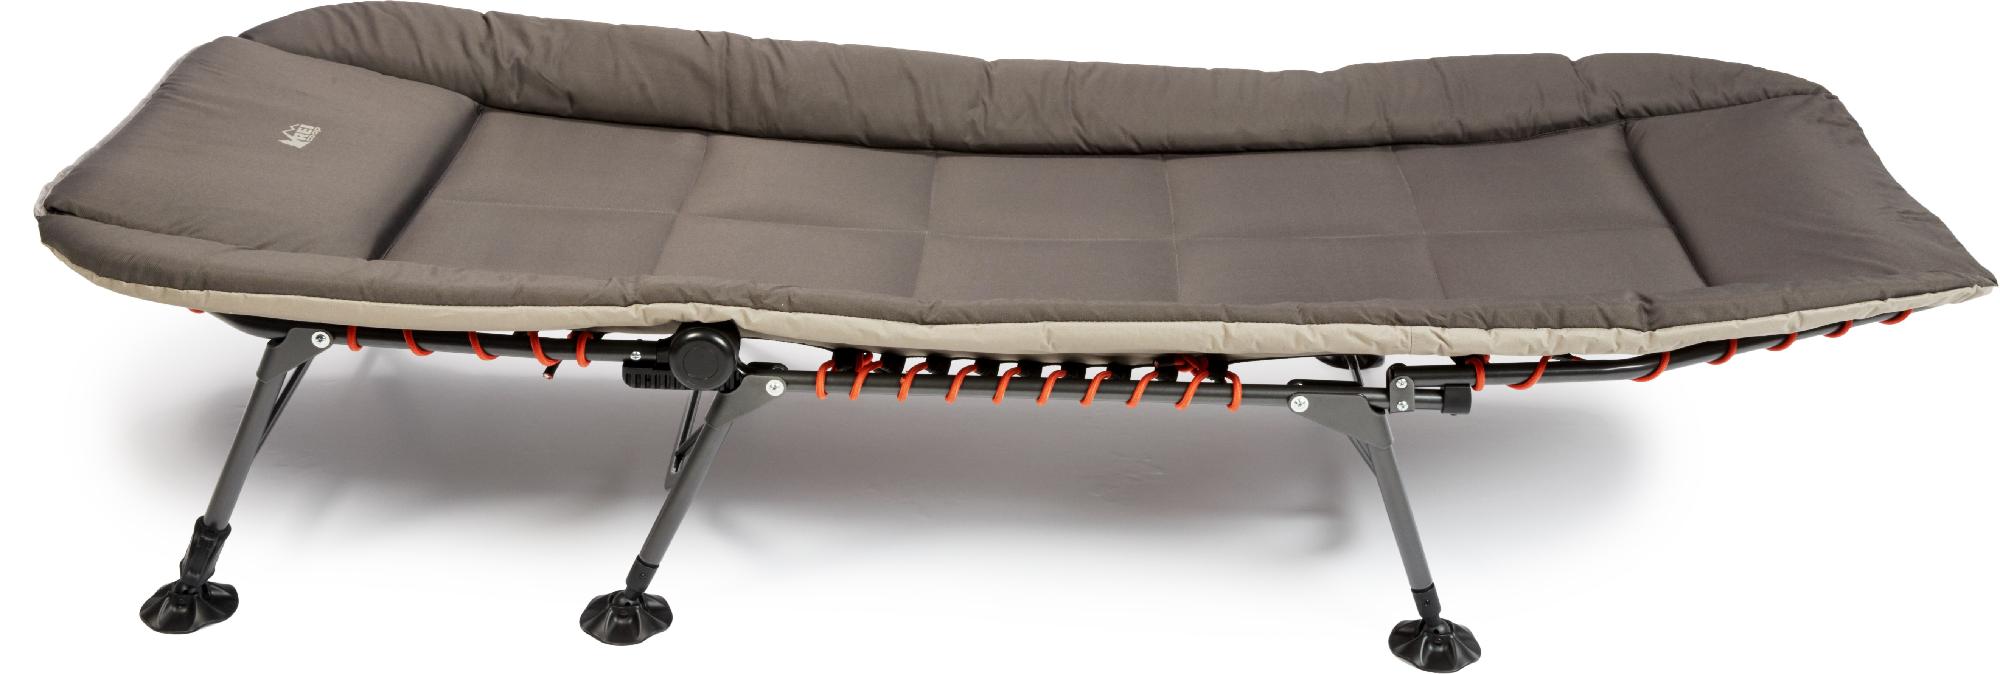 best camping cot